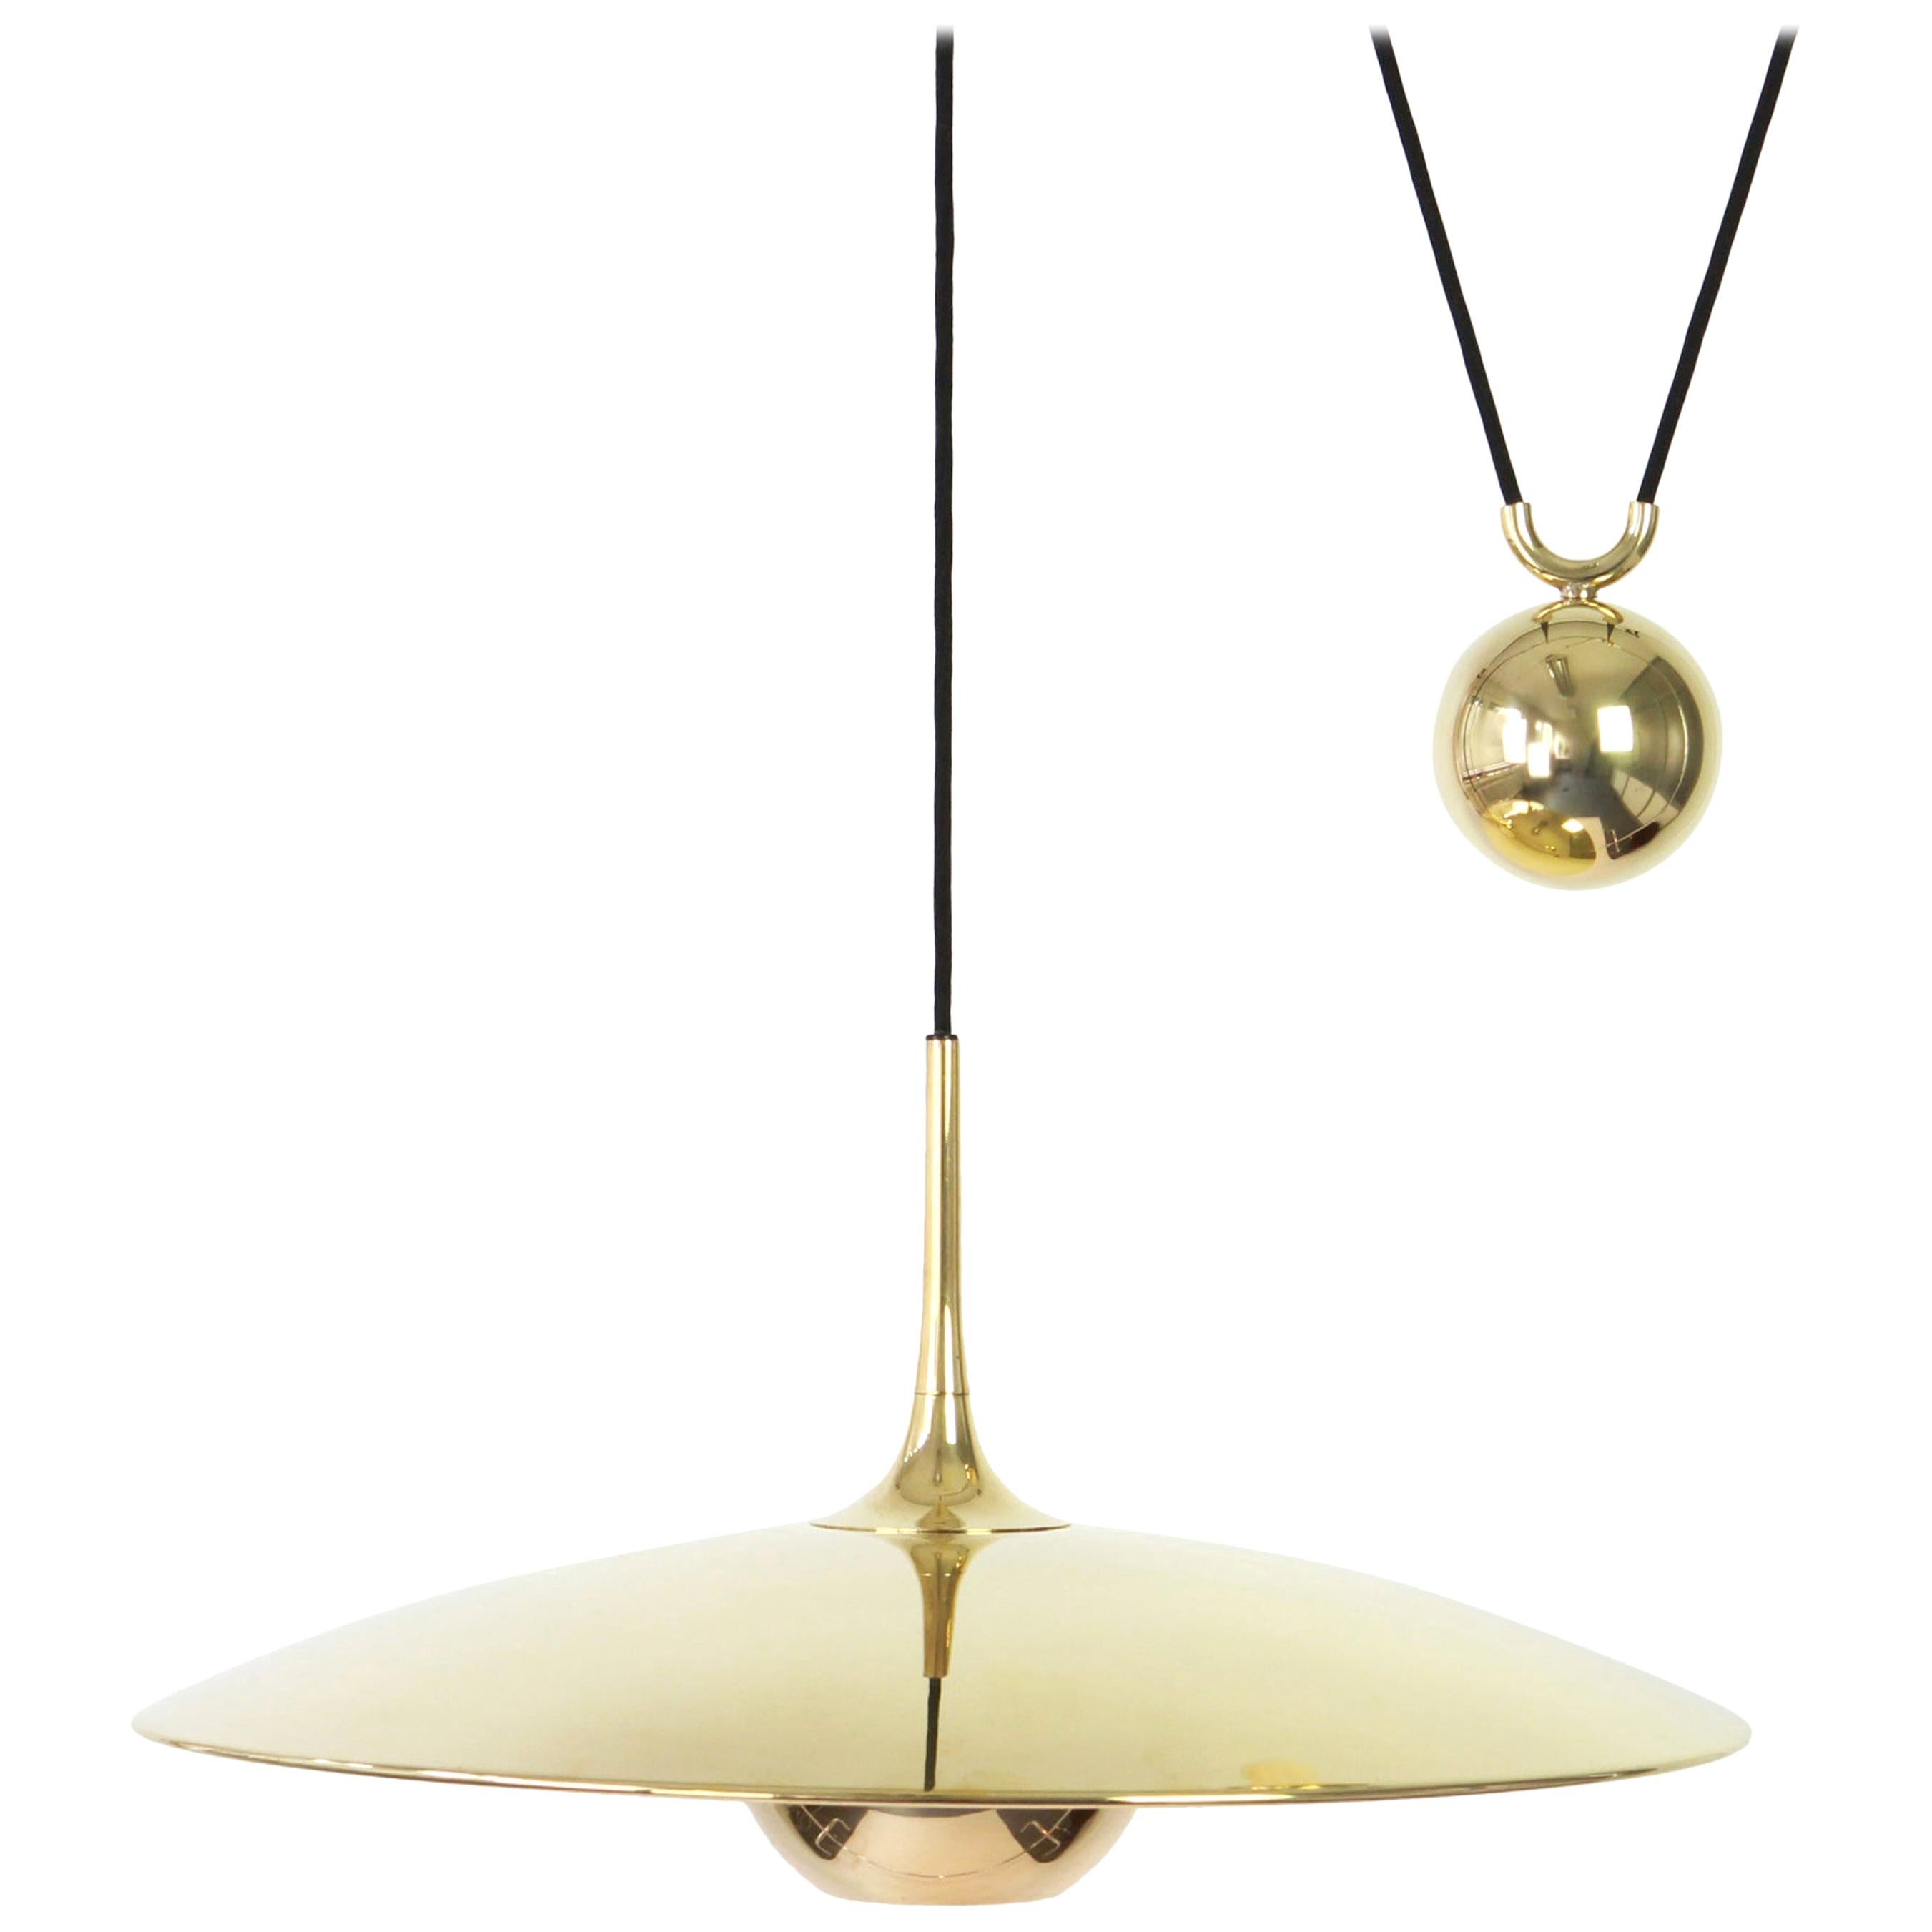 Large adjustable brass counterweight pendant light designed by Florian Schulz, Germany, 1970s.
Socket: 1 x standard bulb - E27 - Up to 150 Watt 
Light bulbs are not included. It is possible to install this fixture in all countries (US, UK, Europe,